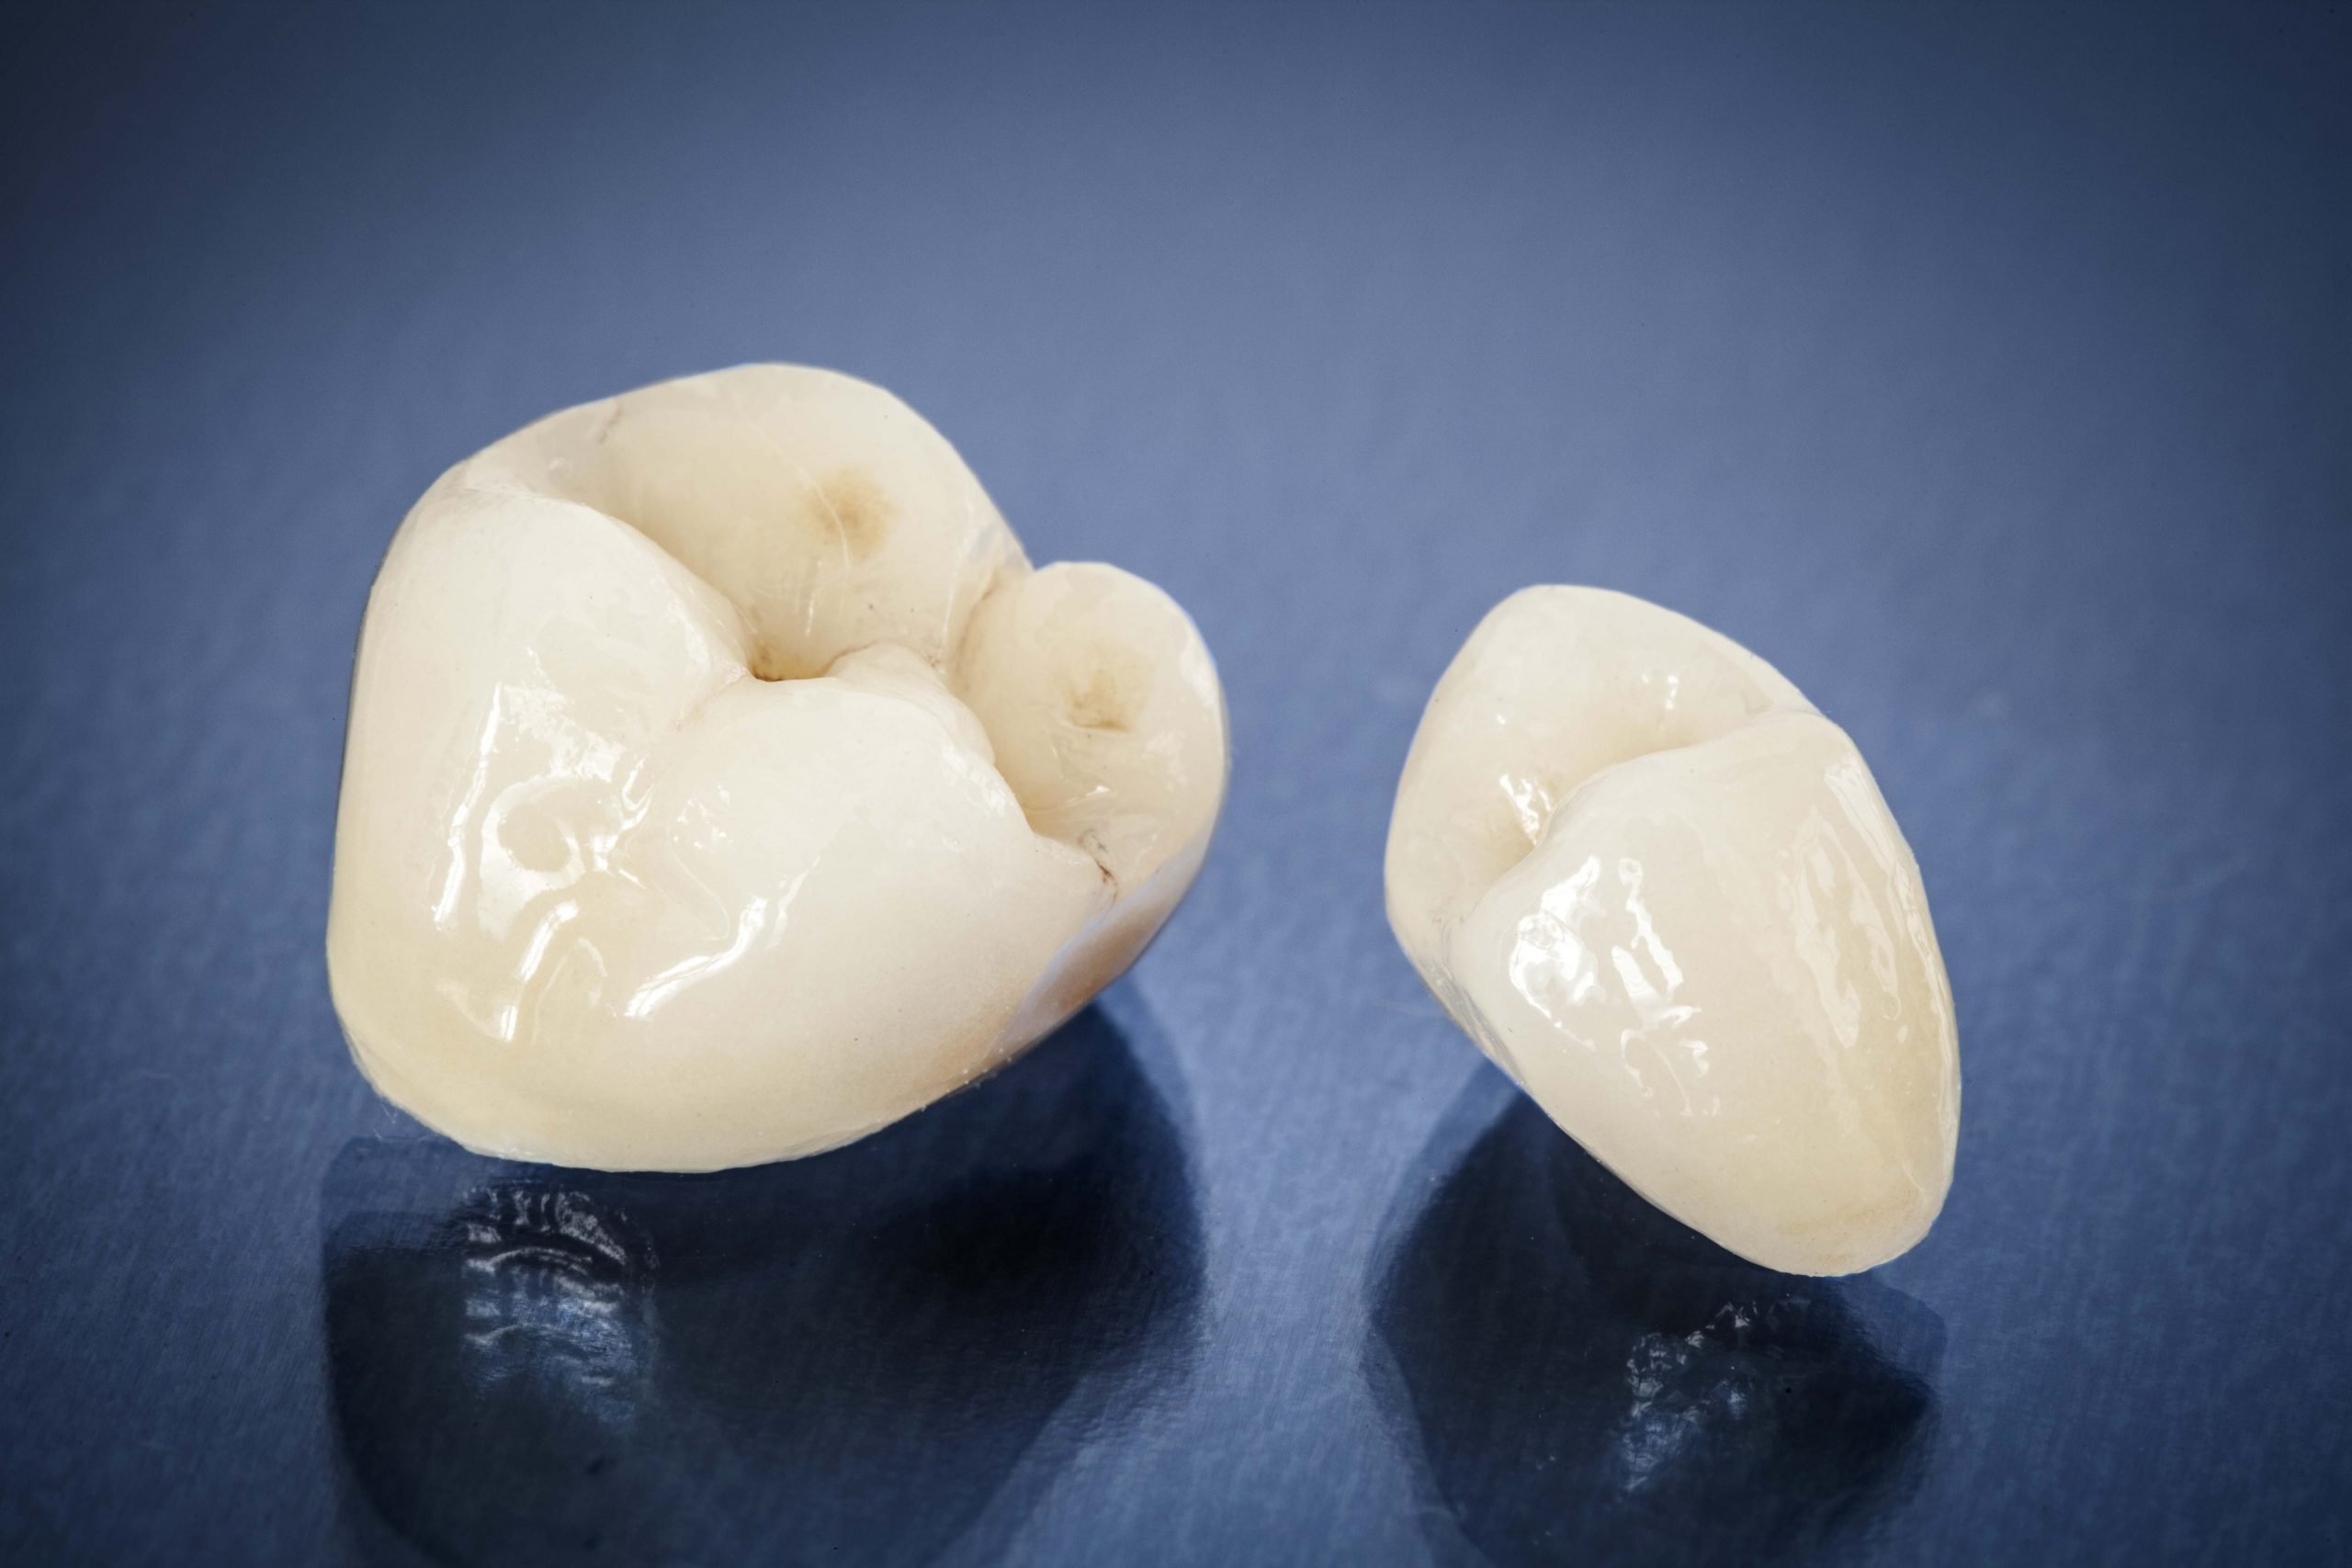 CEREC Same-Day Crowns, made in one visit and avoid the messy putty and pain and worry of temporary crowns